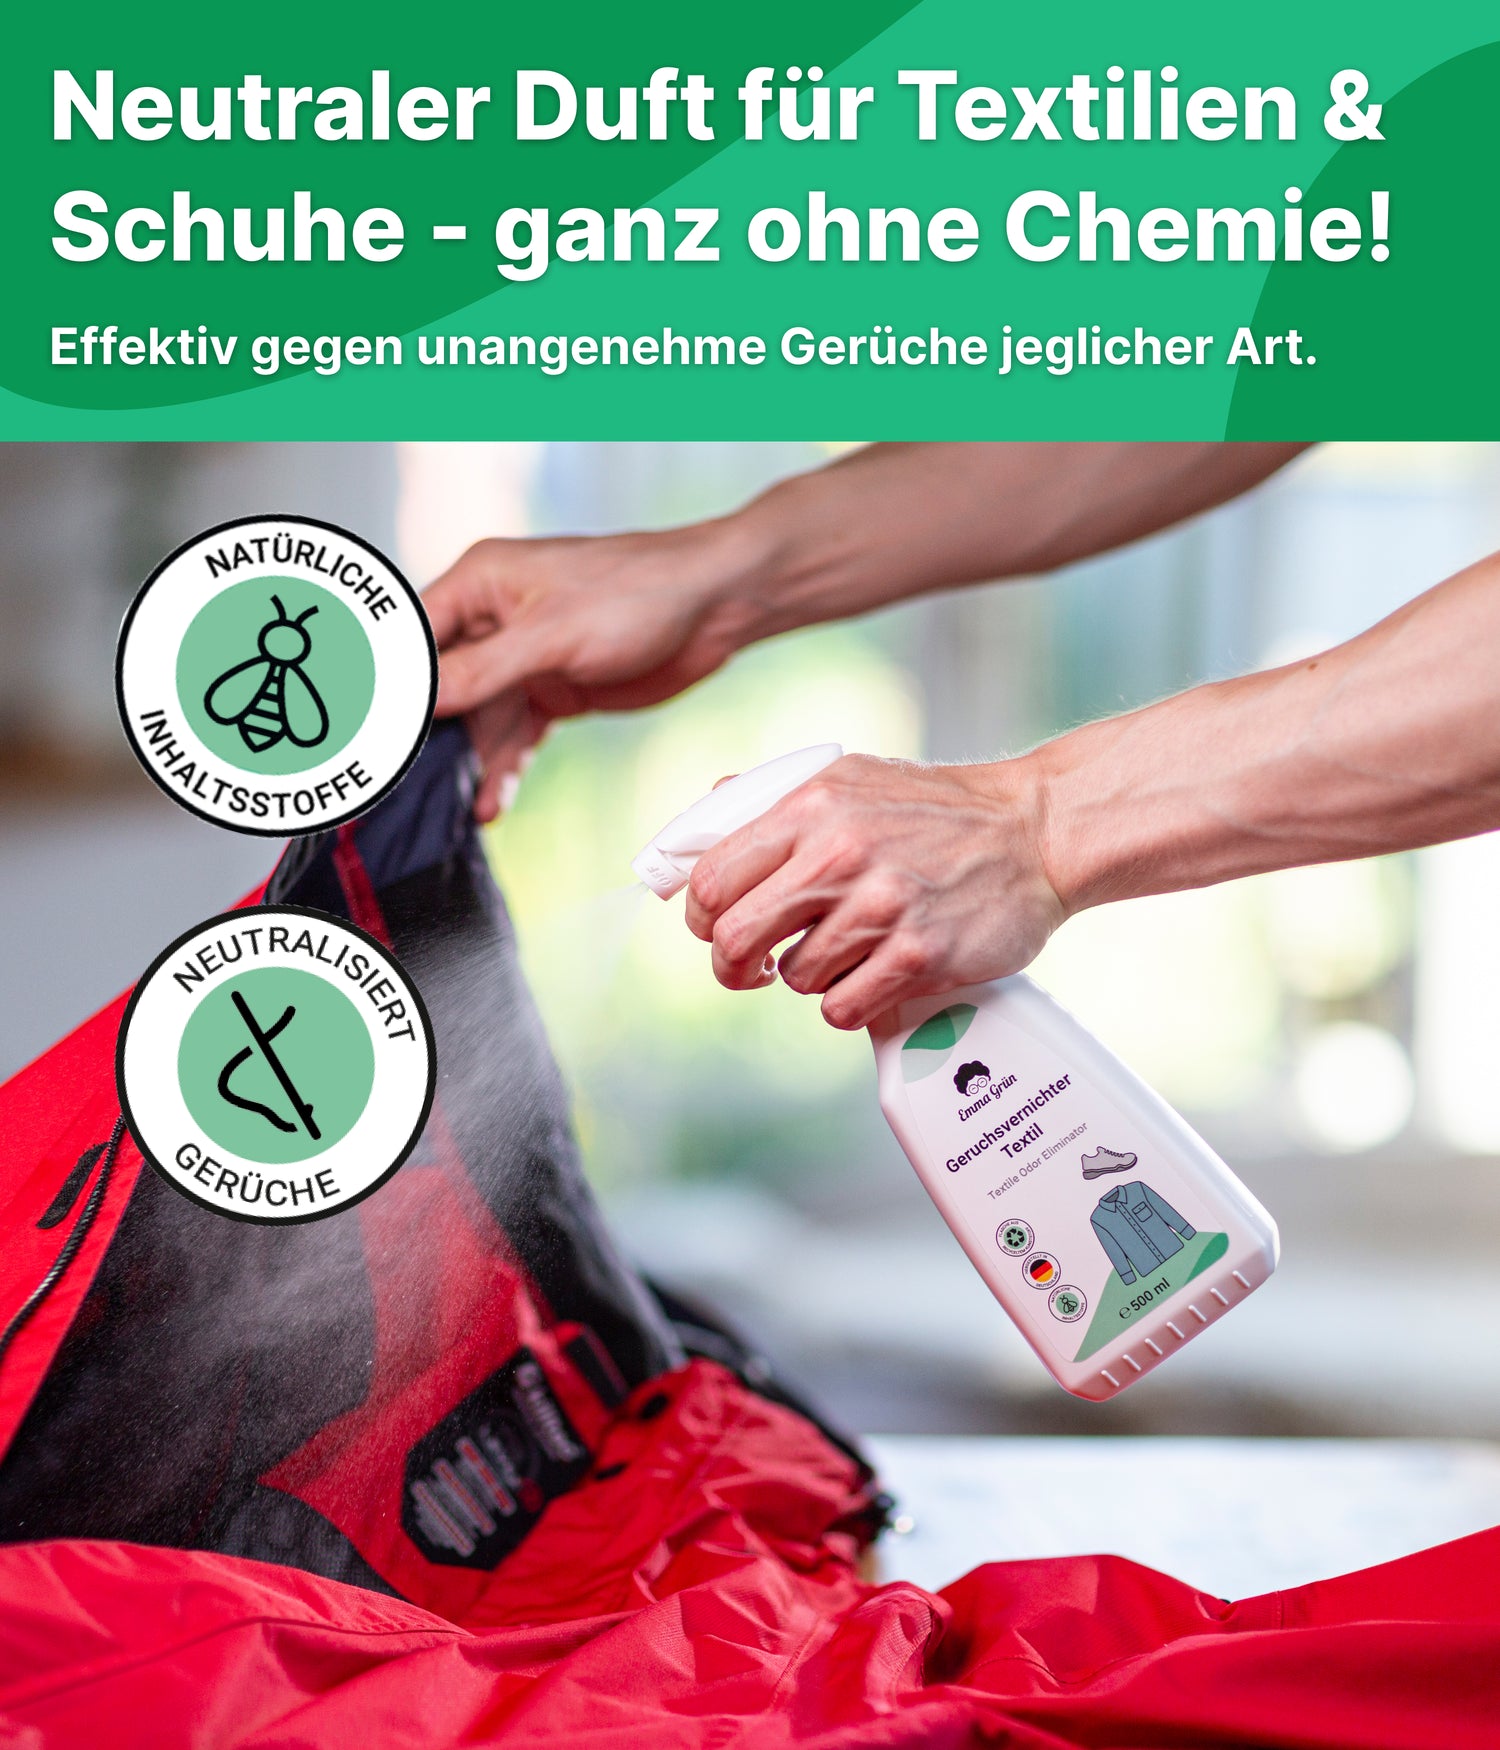 Prowin Neutral Alleskonner Do-it-All Cleaner, 1 Litre : :  Health & Personal Care